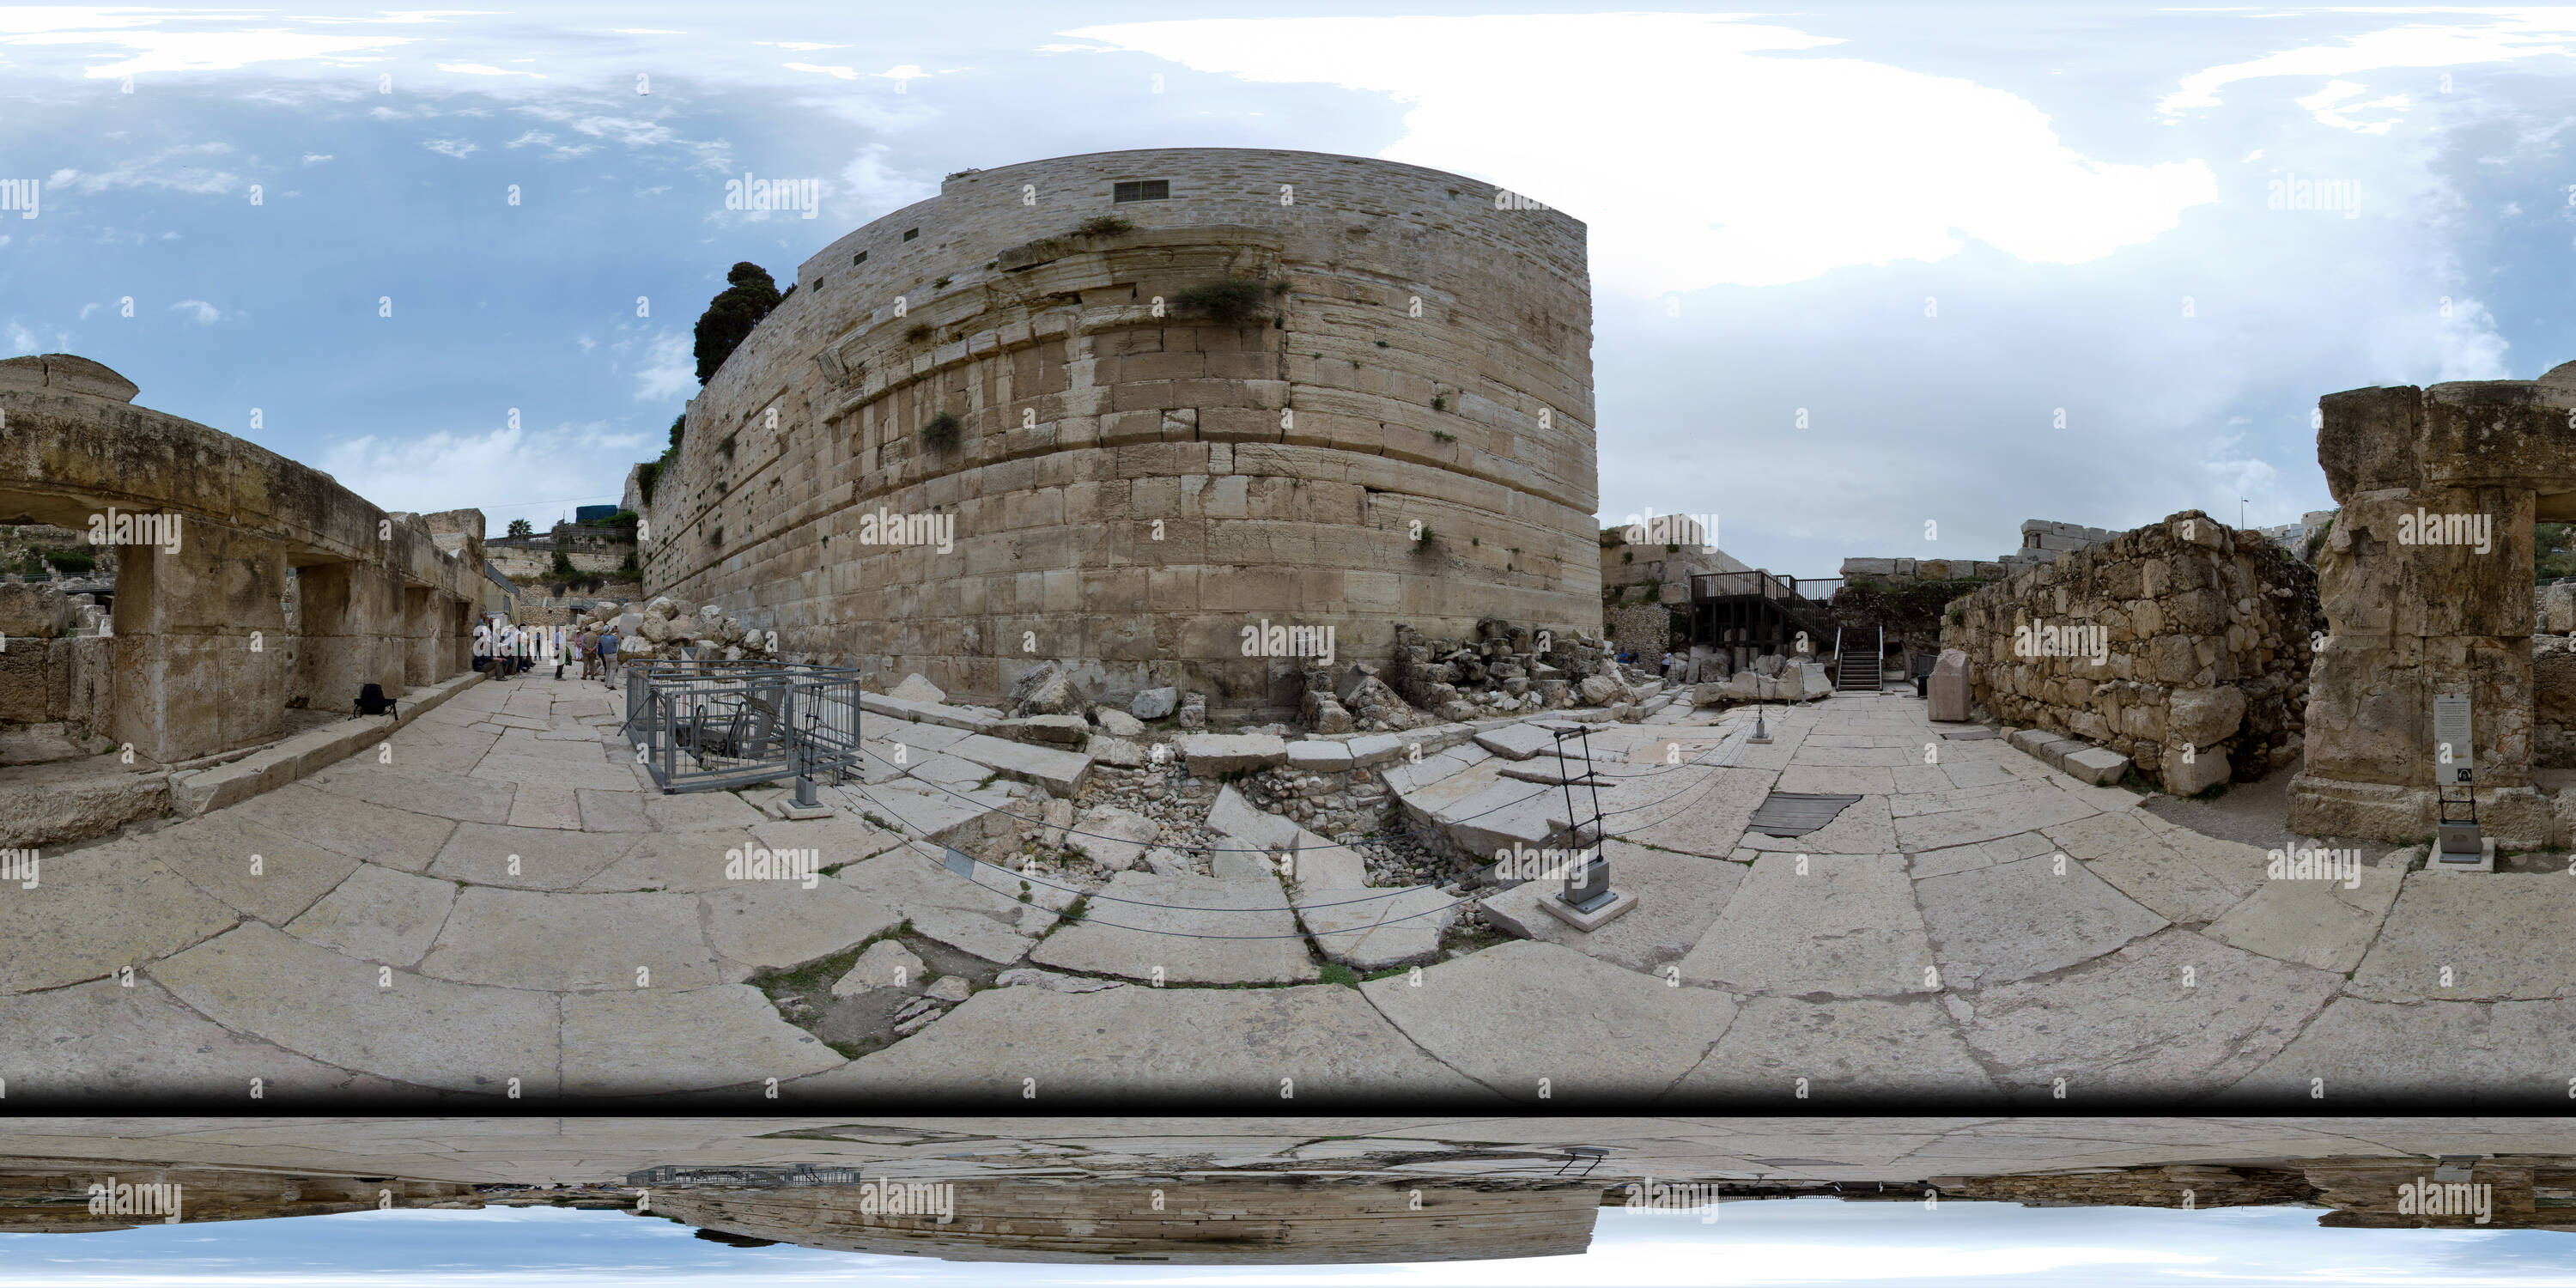 360 degree panoramic view of Robinsons Arch, Jerusalem, Noon, 2016-04, freehand